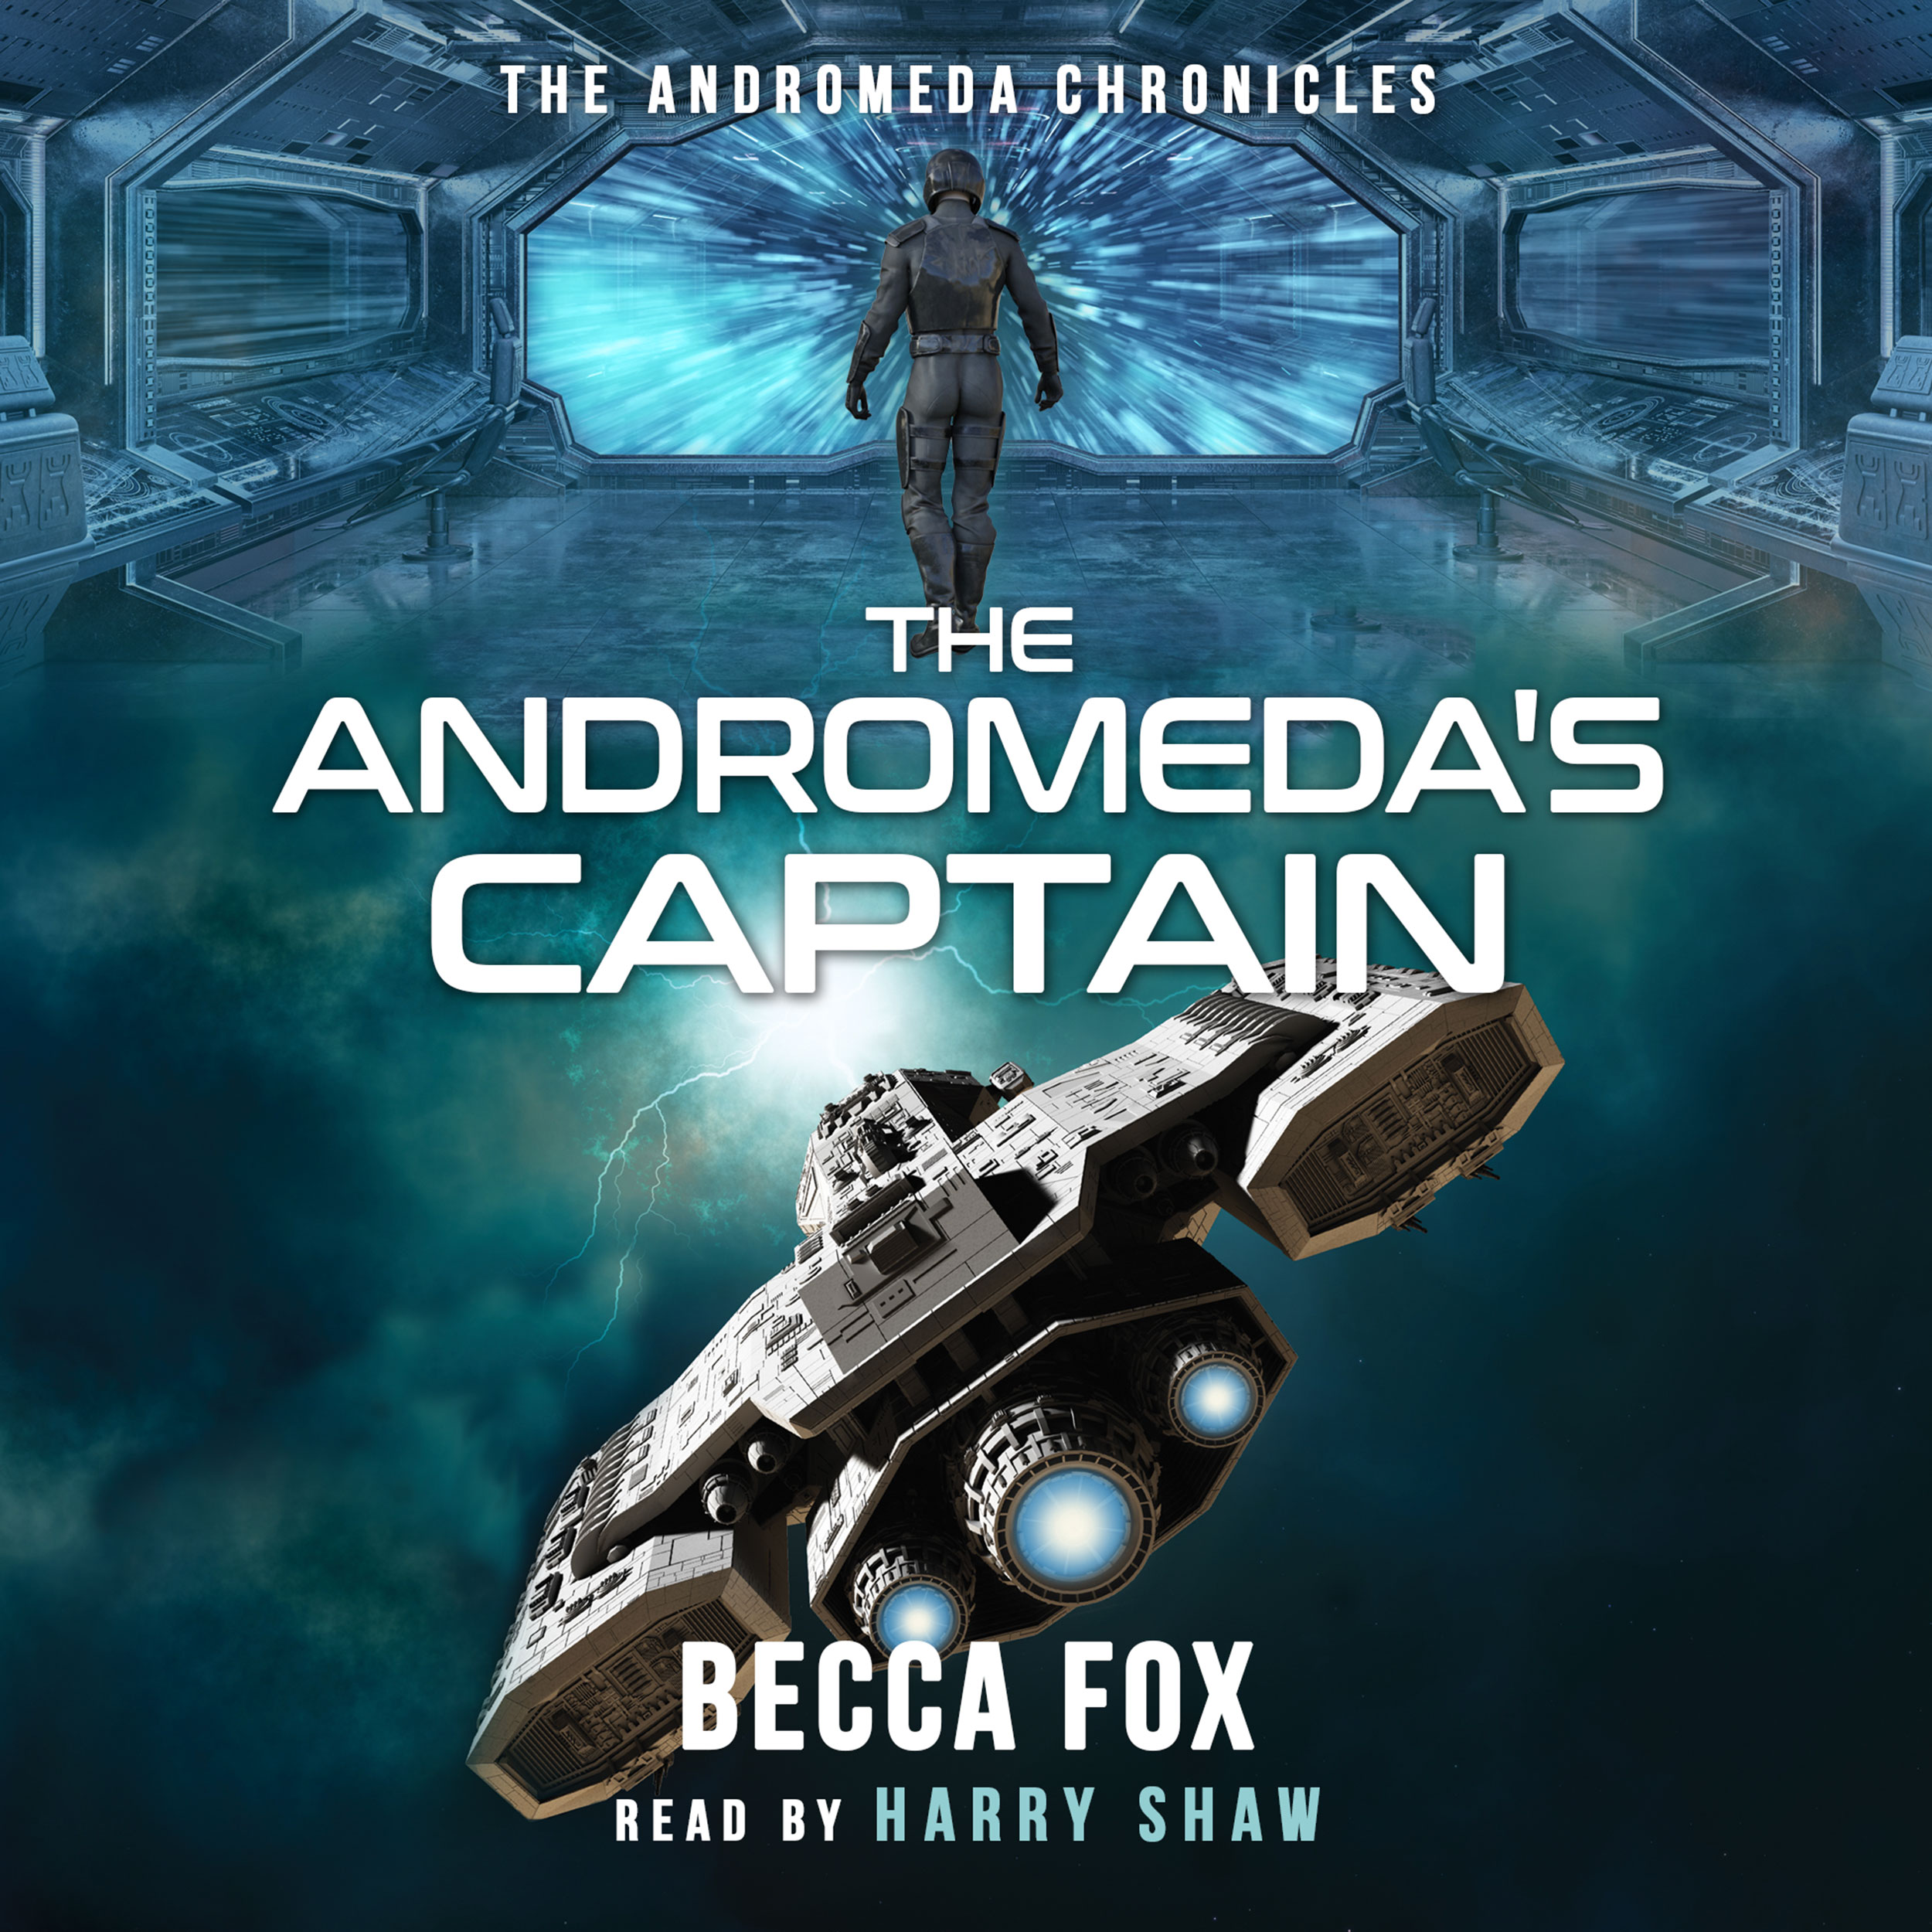 The Andromeda's Captain by Becca Fox (Read by Harry Shaw